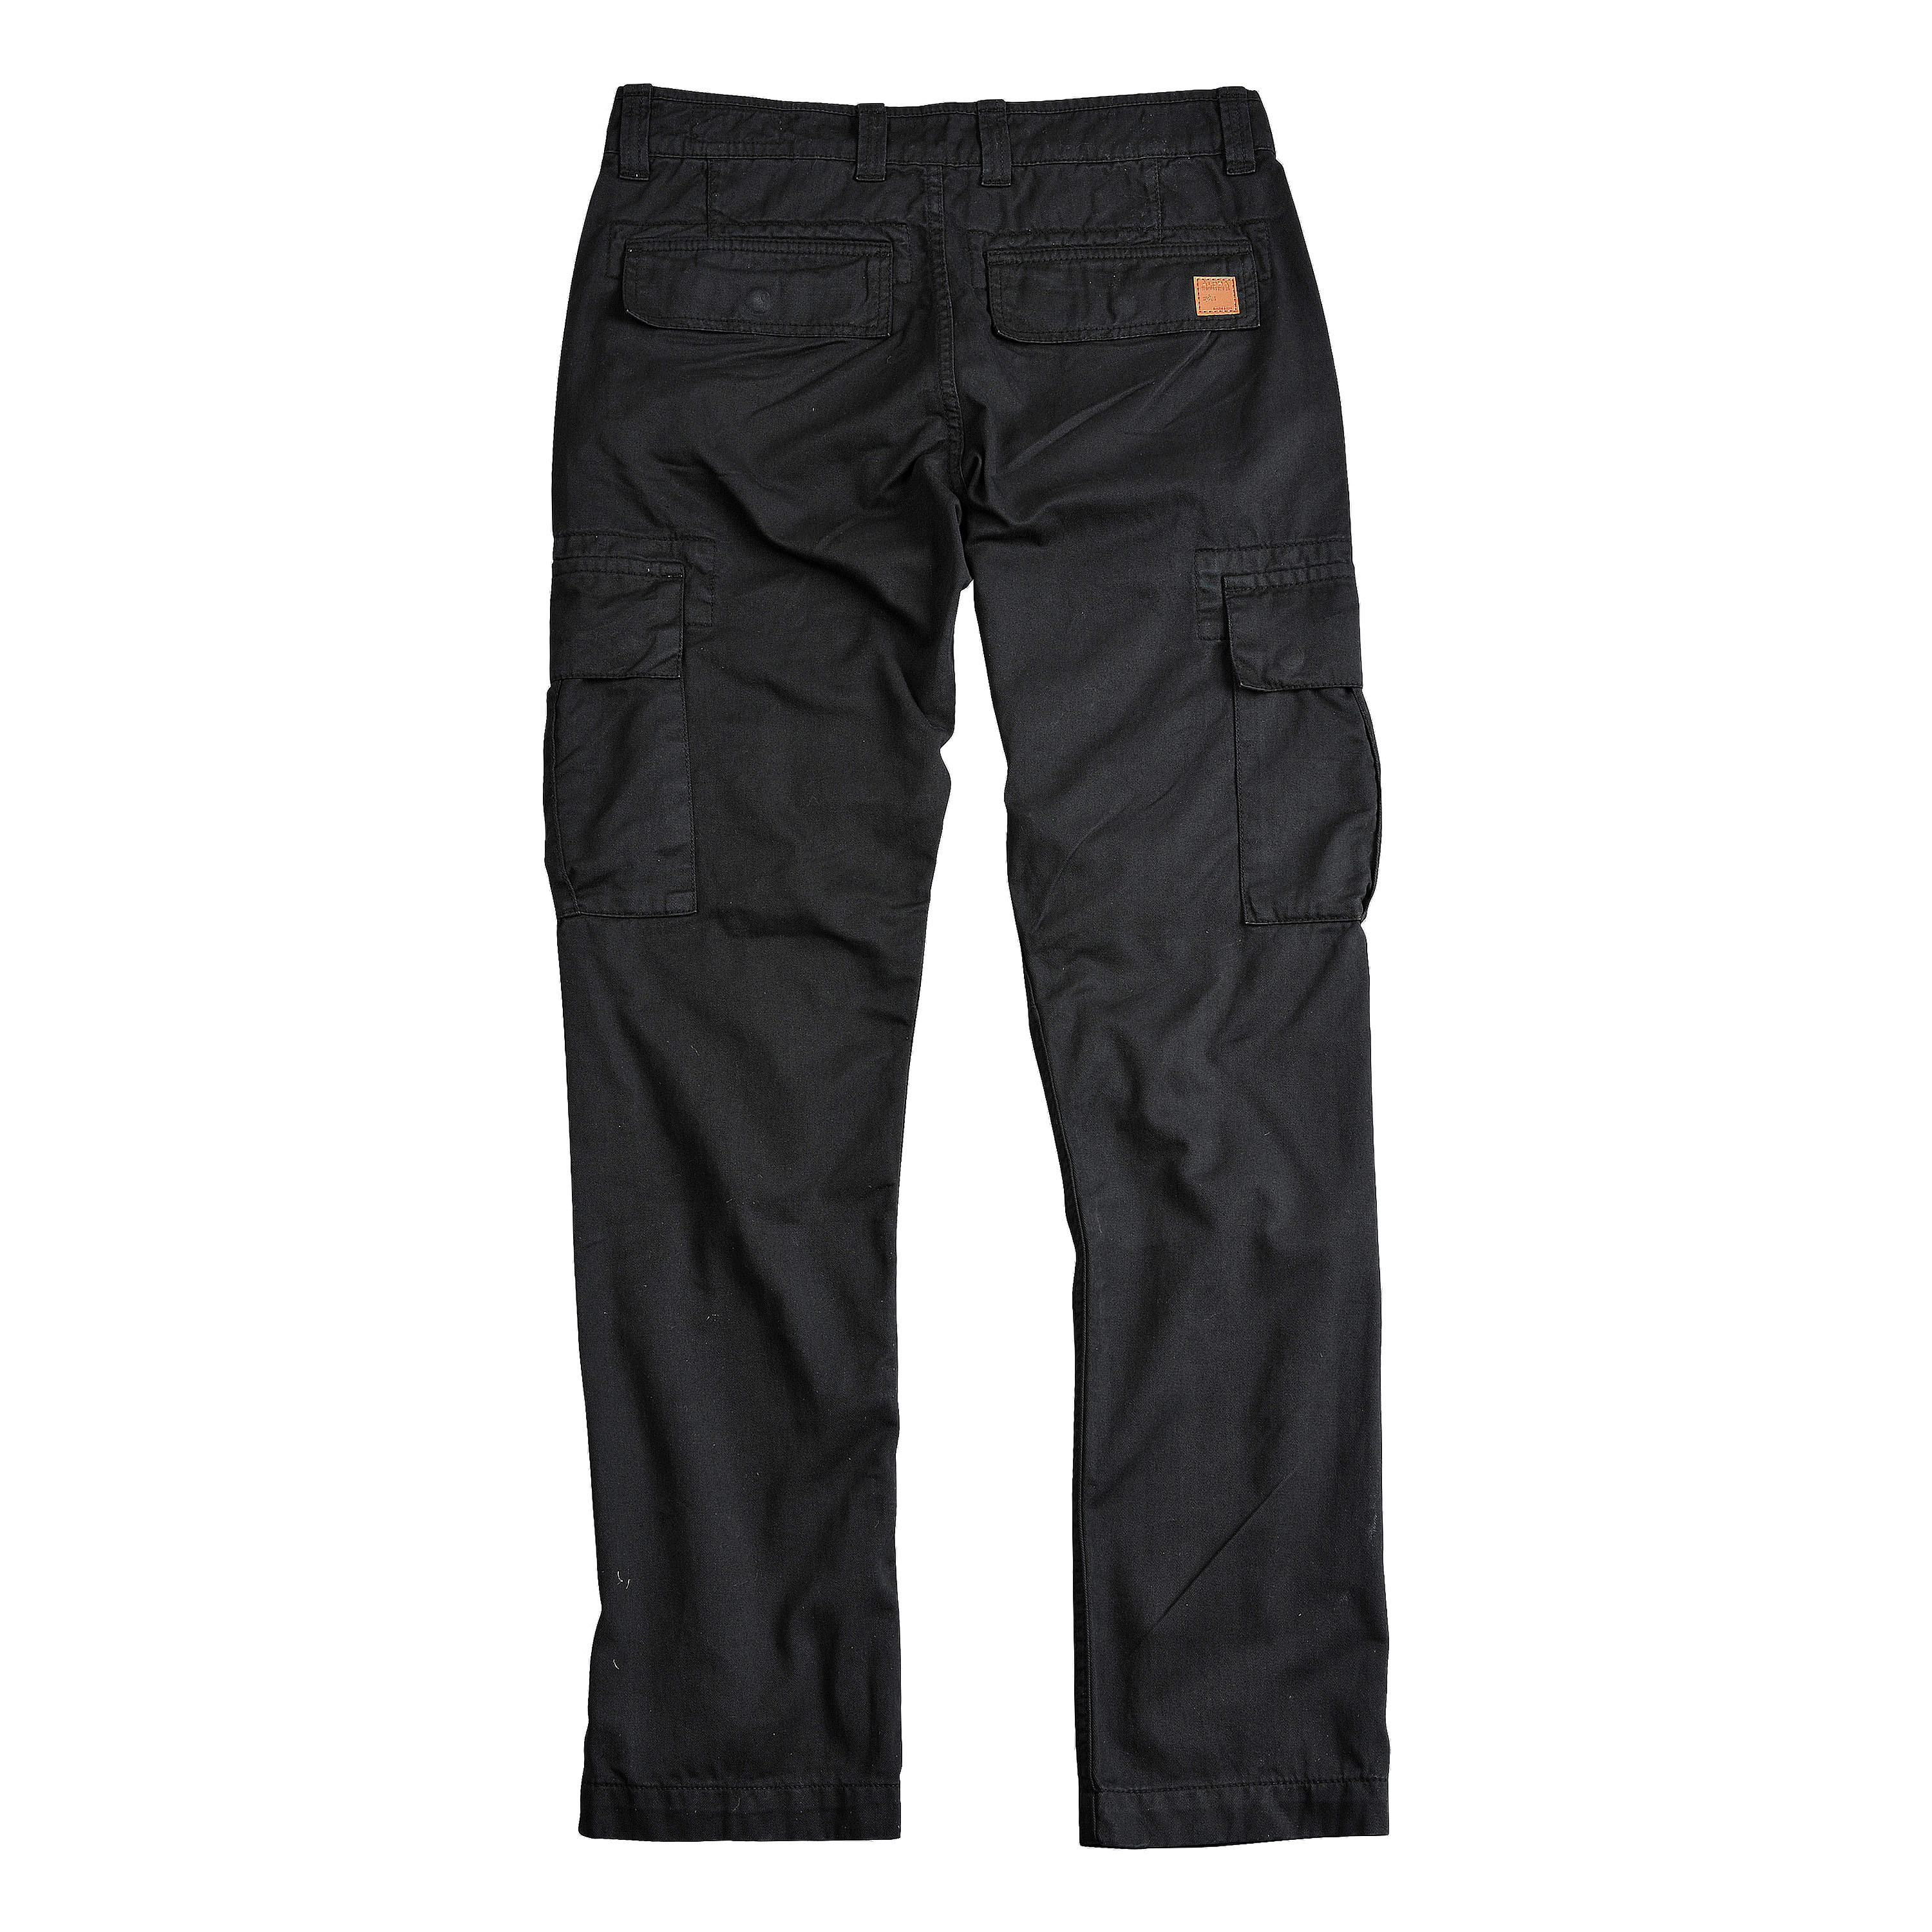 Industries Pants ASMC by Agent Purchase the black Alpha